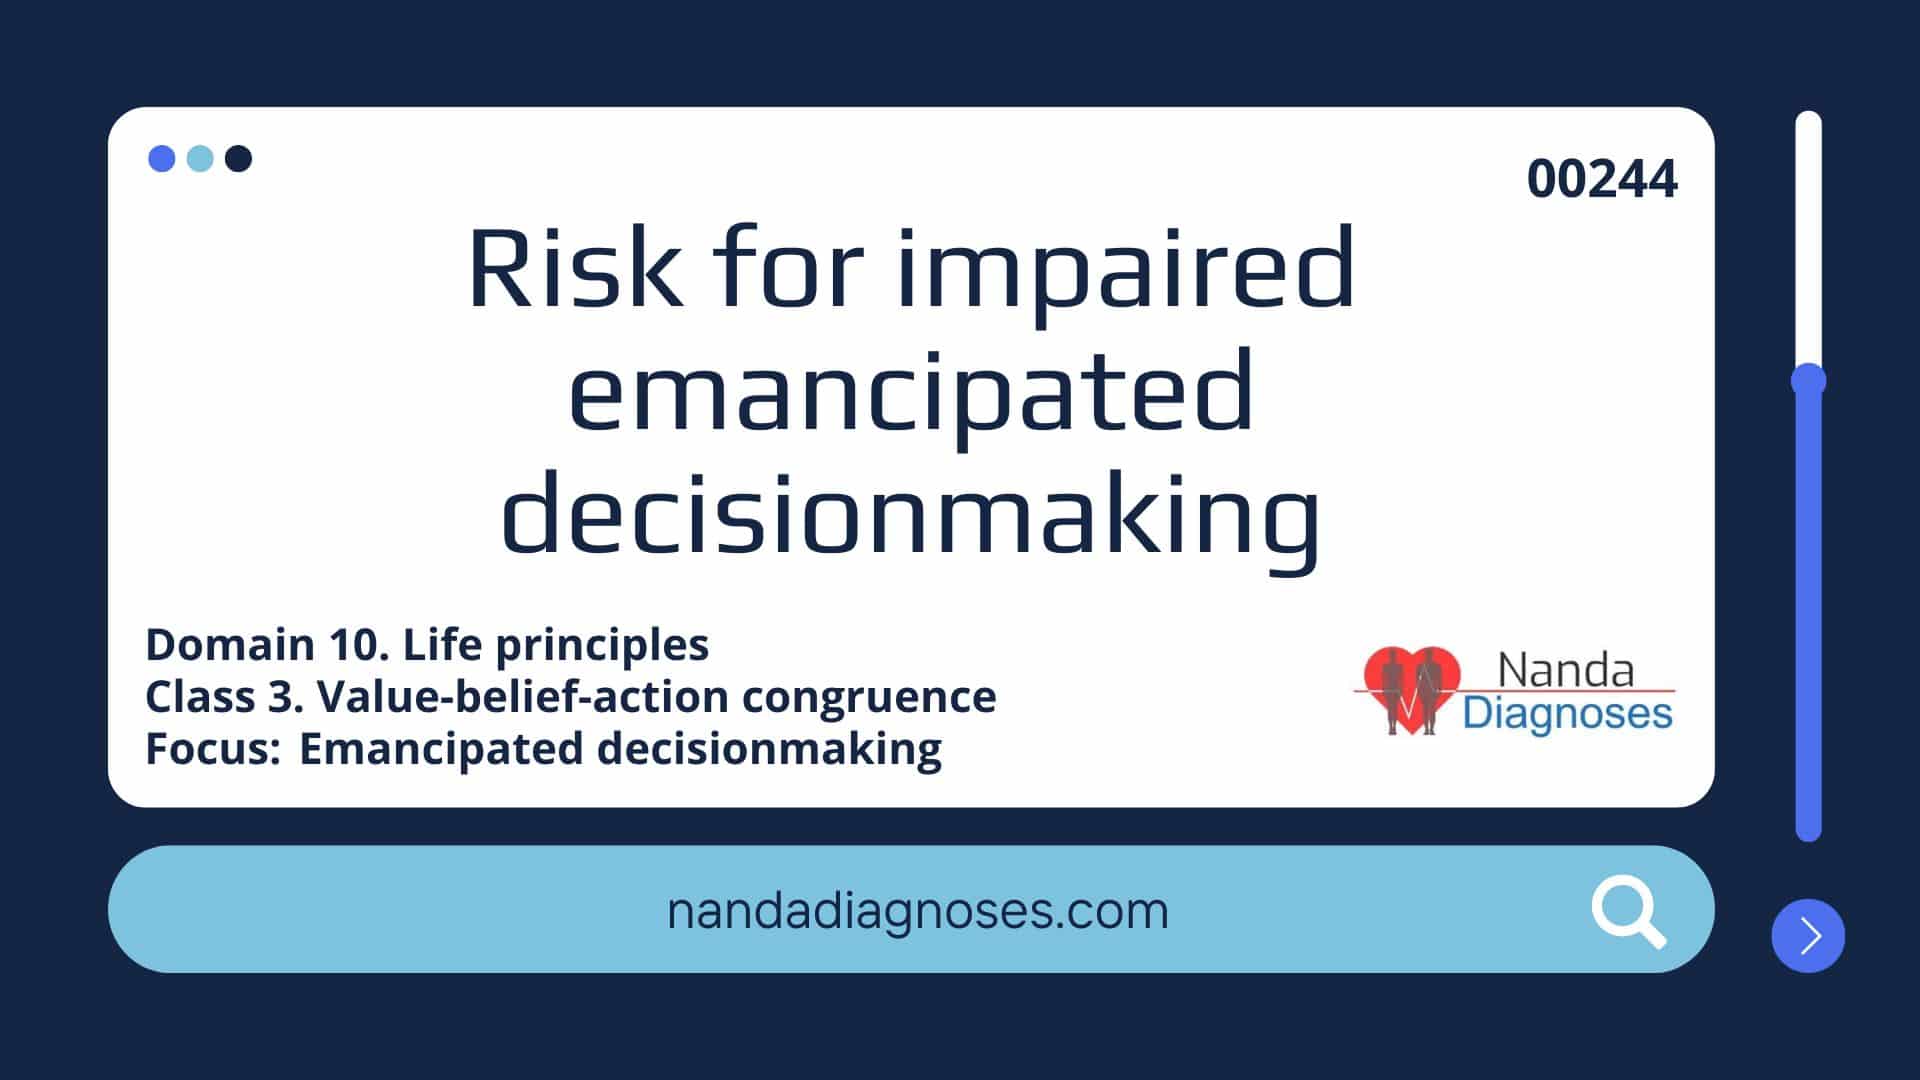 Nursing diagnosis Risk for impaired emancipated decisionmaking